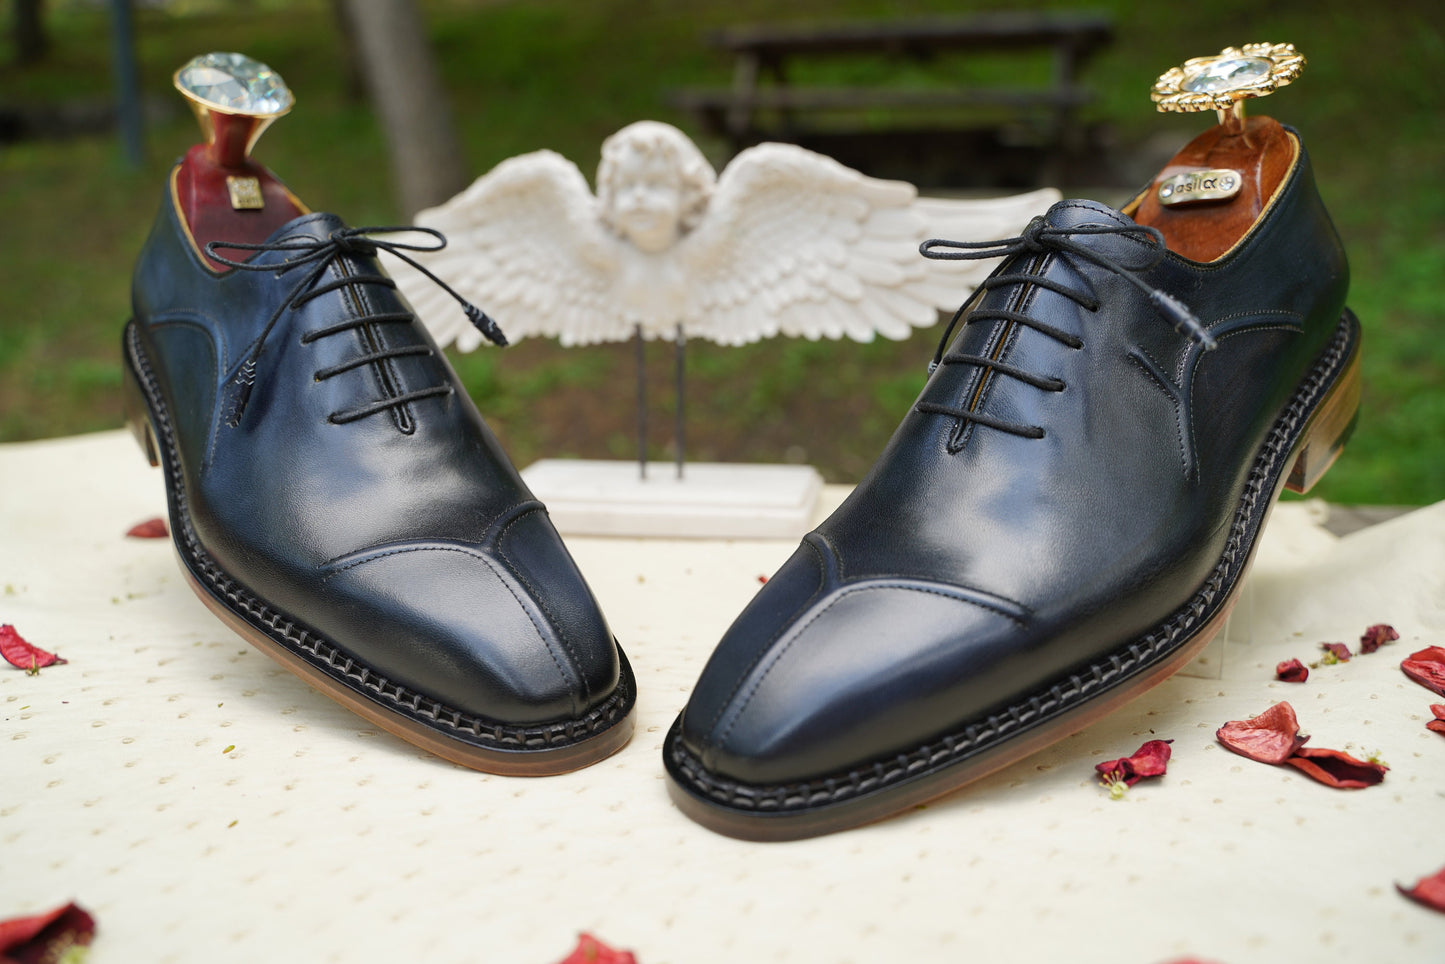 Wing Tip Black Leather Men Shoes Oxford Custom Men Shoes For Men Made To Order Personalized Shoes Dress Shoes Suit Shoes